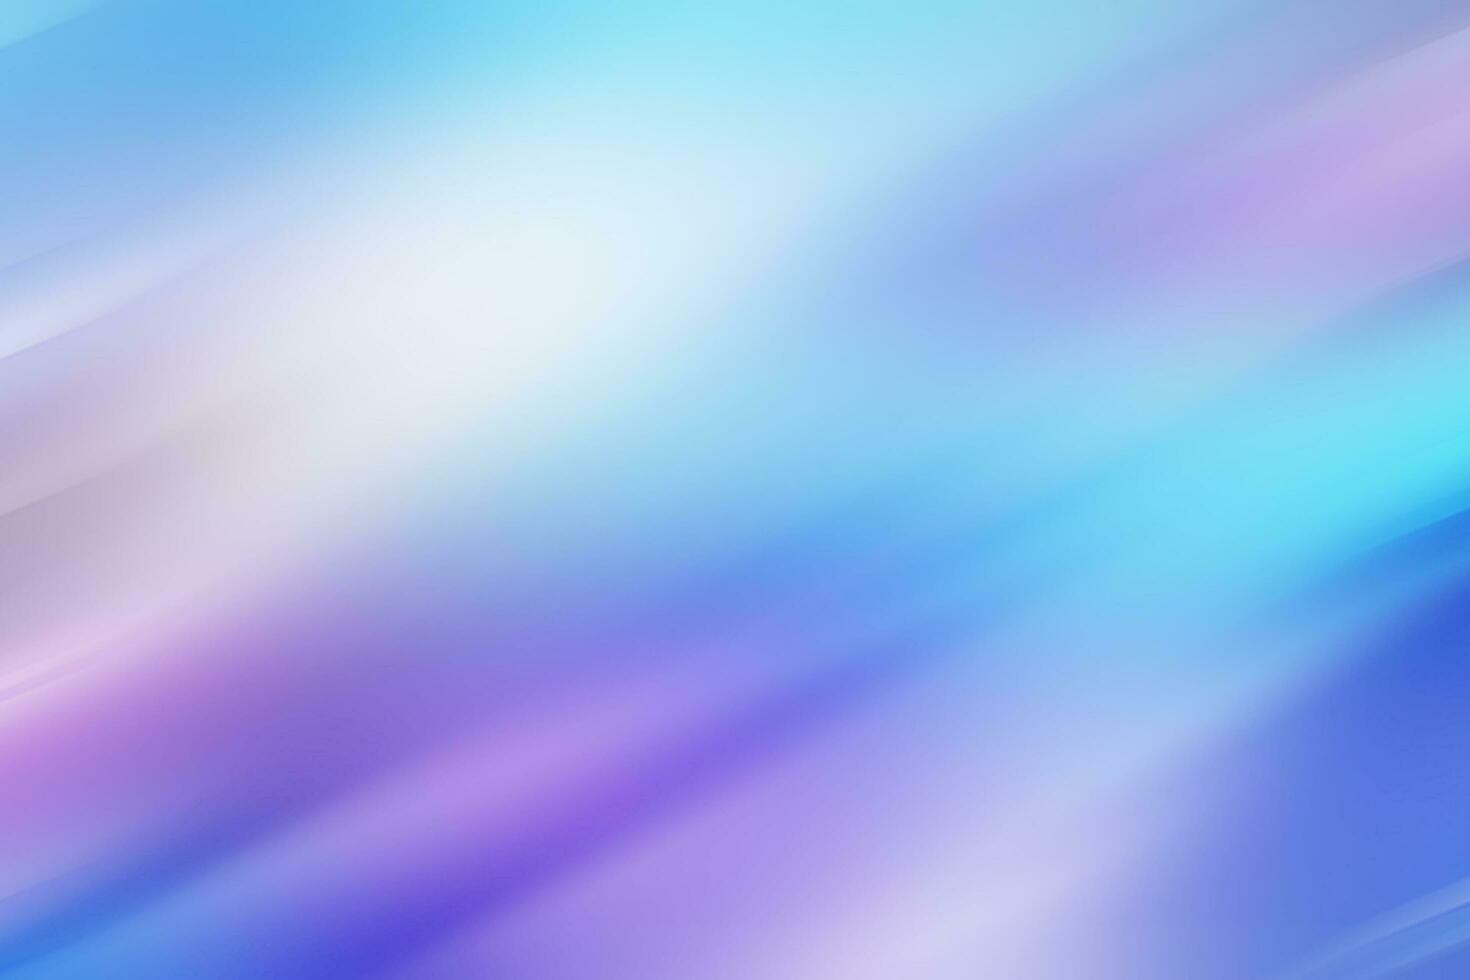 Creative Abstract Background Stripes Defocused Poster Wallpaper photo